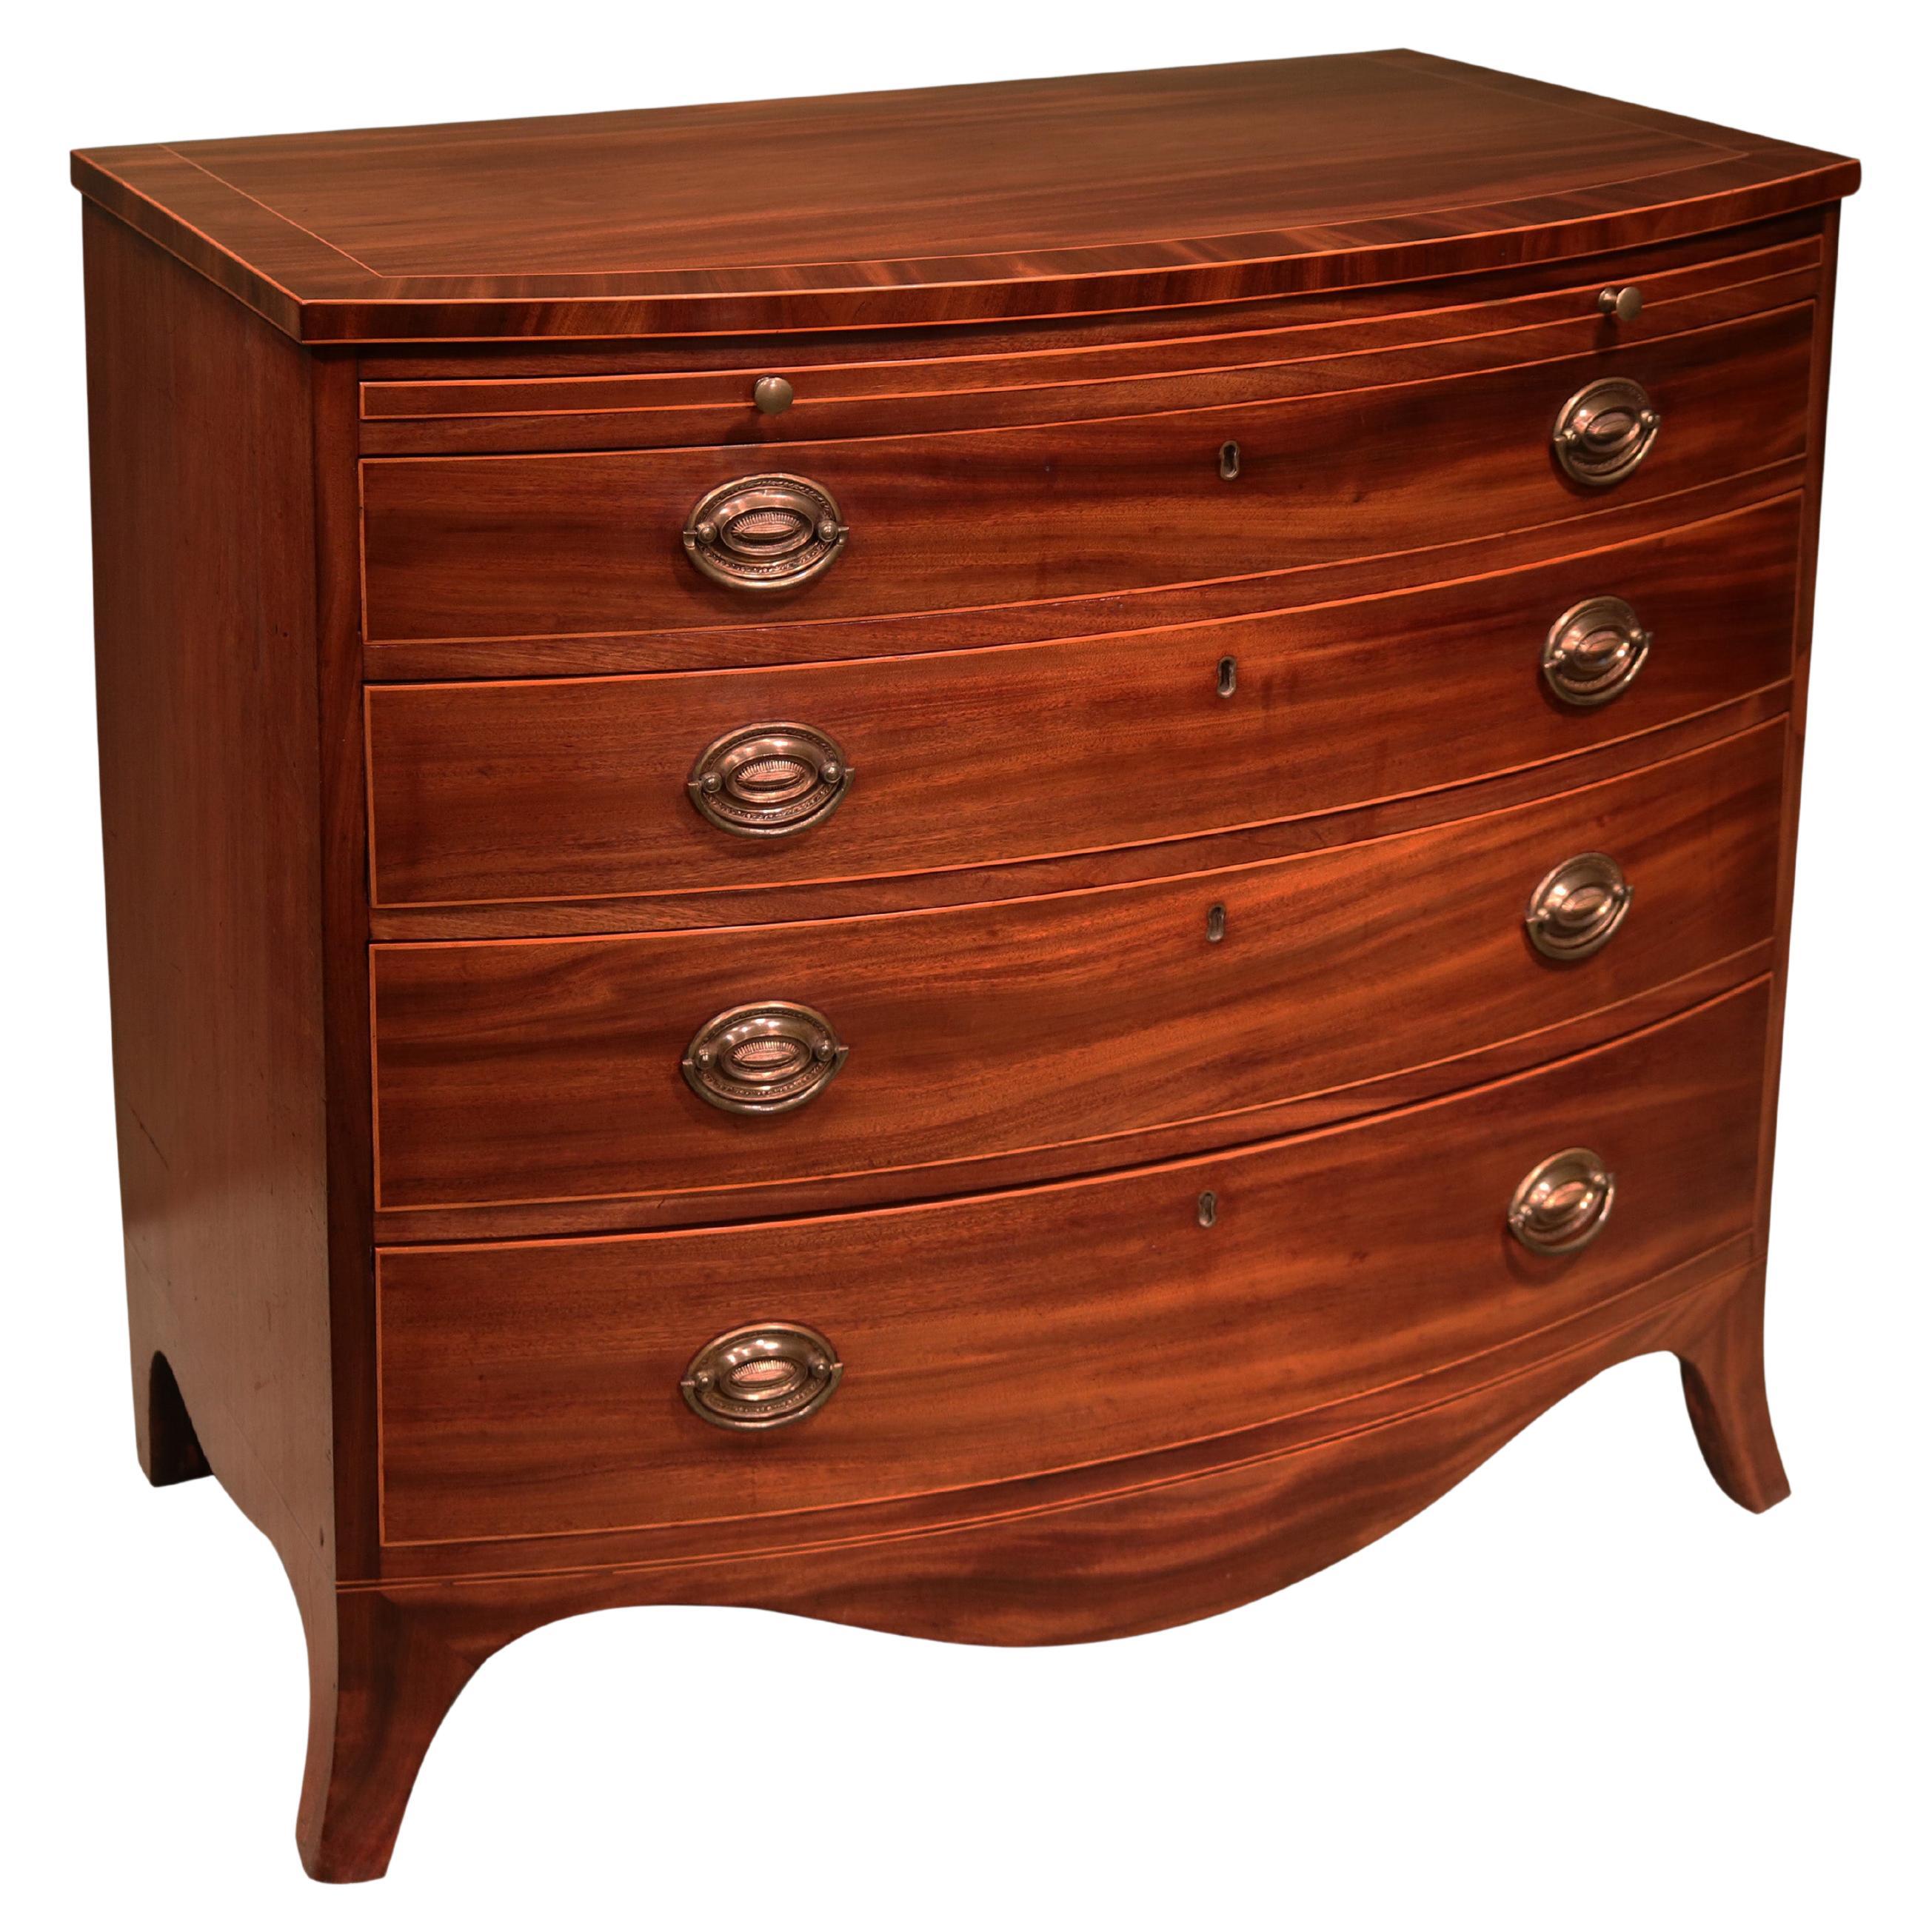 Antique early 19th century mahogany bow fronted chest of drawers For Sale